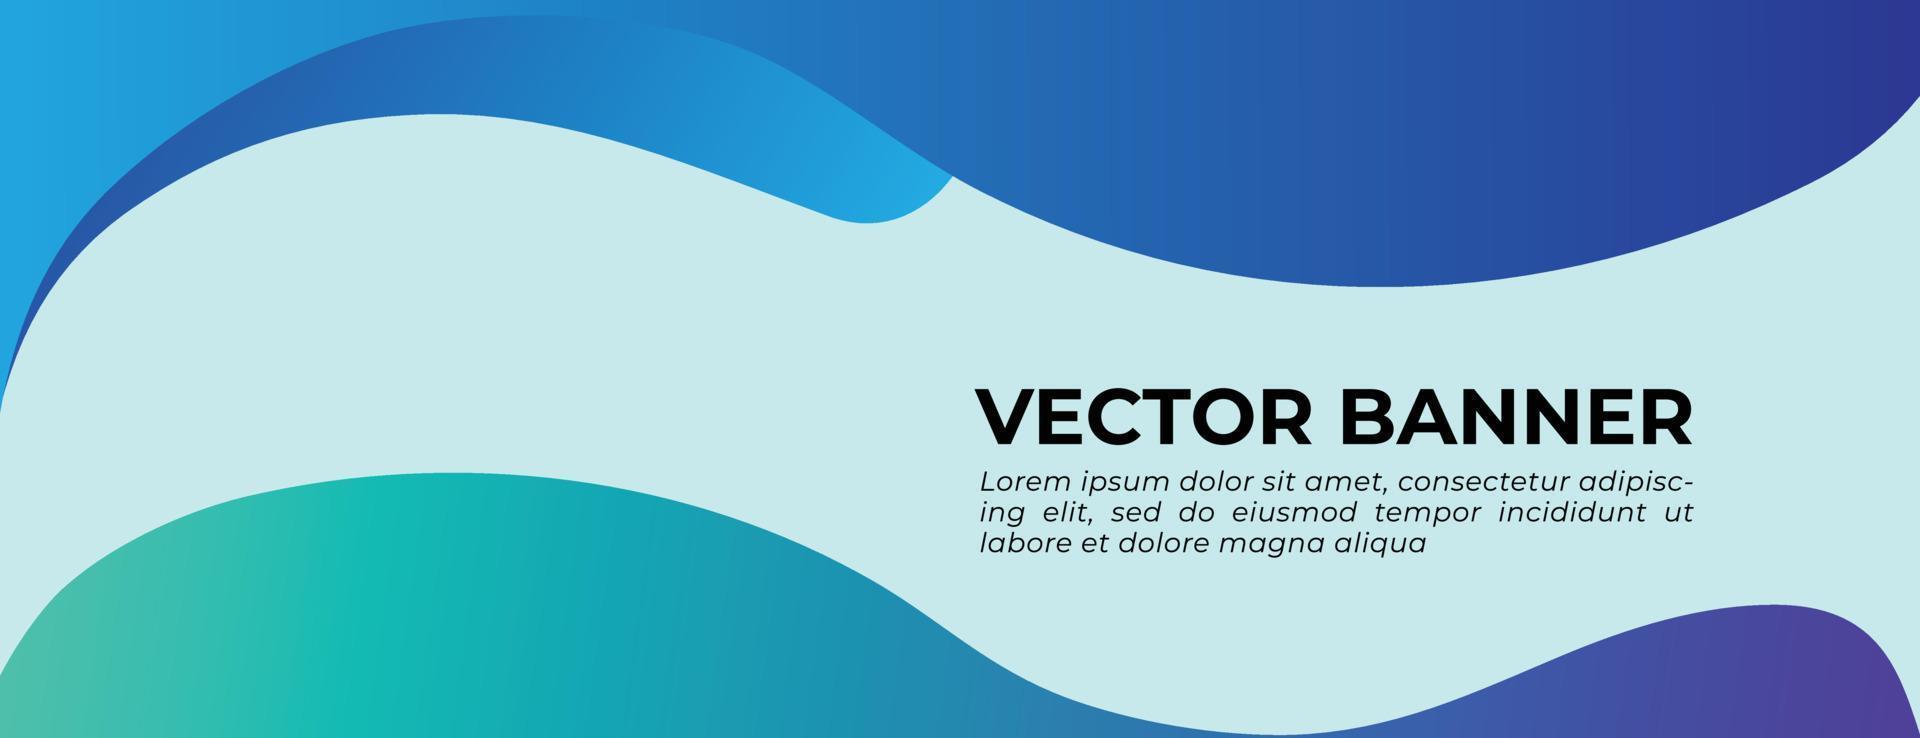 Blue Waves Vector Banner with Geometric Triangle Shape Template Design